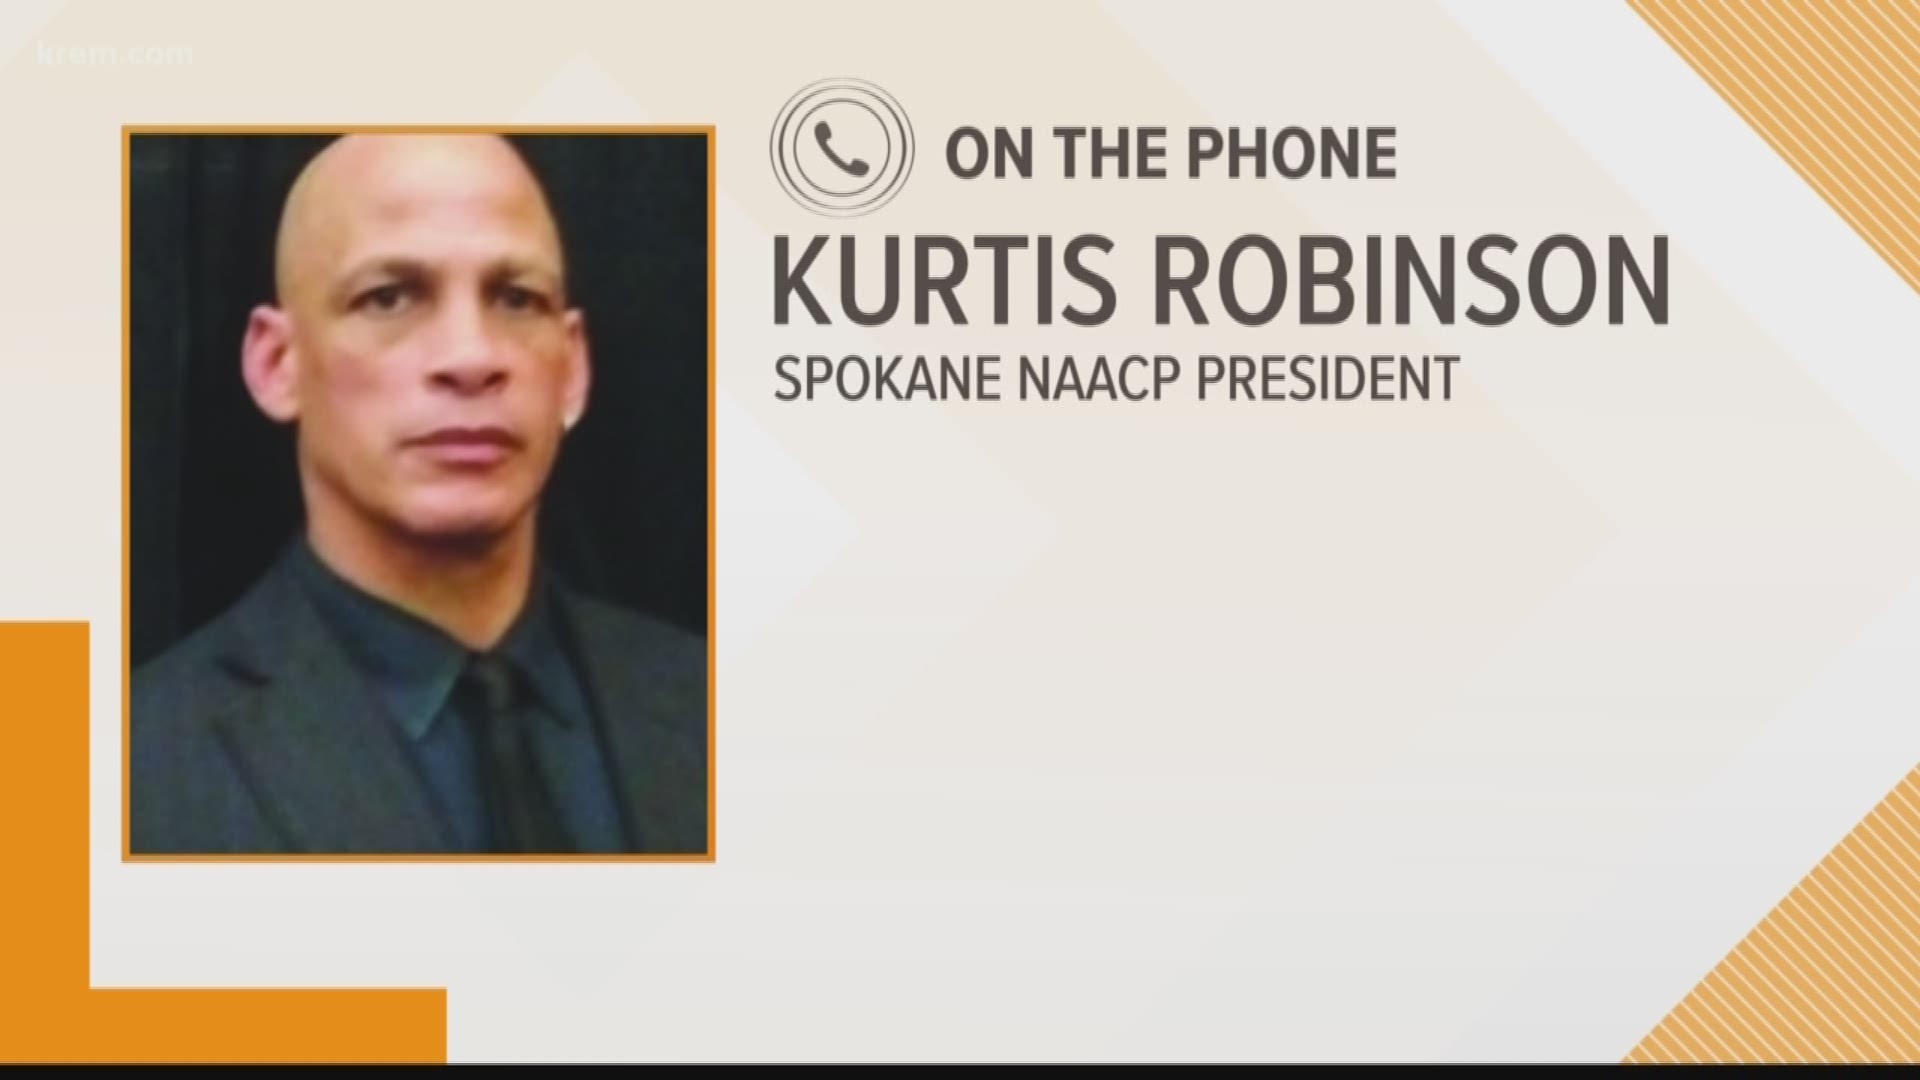 Spokane's NAACP president Kurtis Robinson spoke with Up with KREM about what we can take away from yesterday's events.